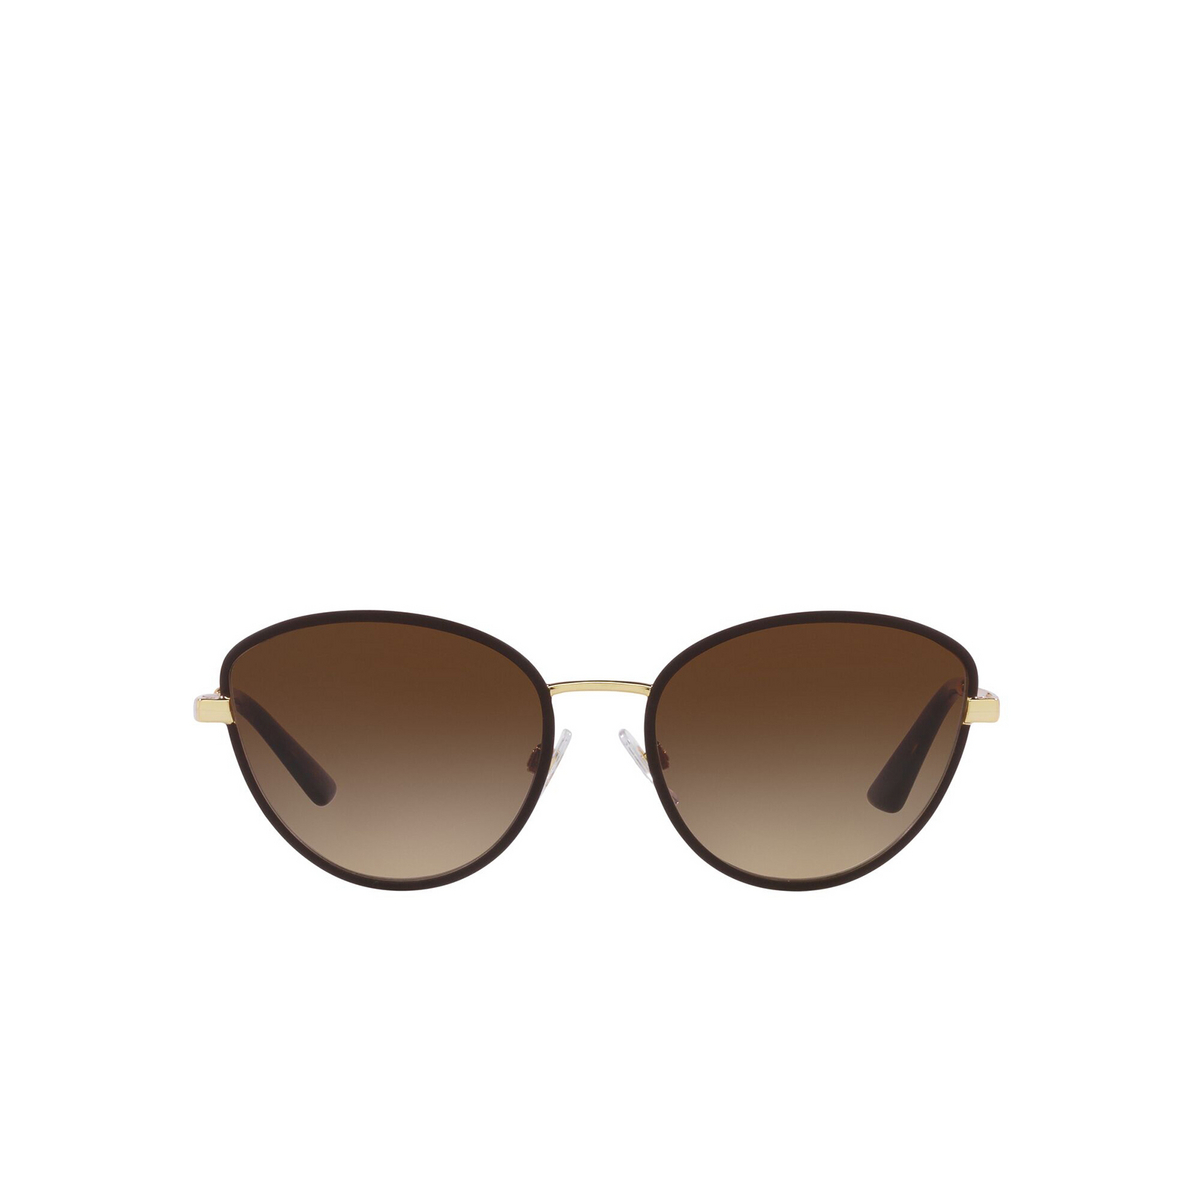 Dolce & Gabbana® Butterfly Sunglasses: DG2280 color Gold / Matte Brown 132013 - front view.